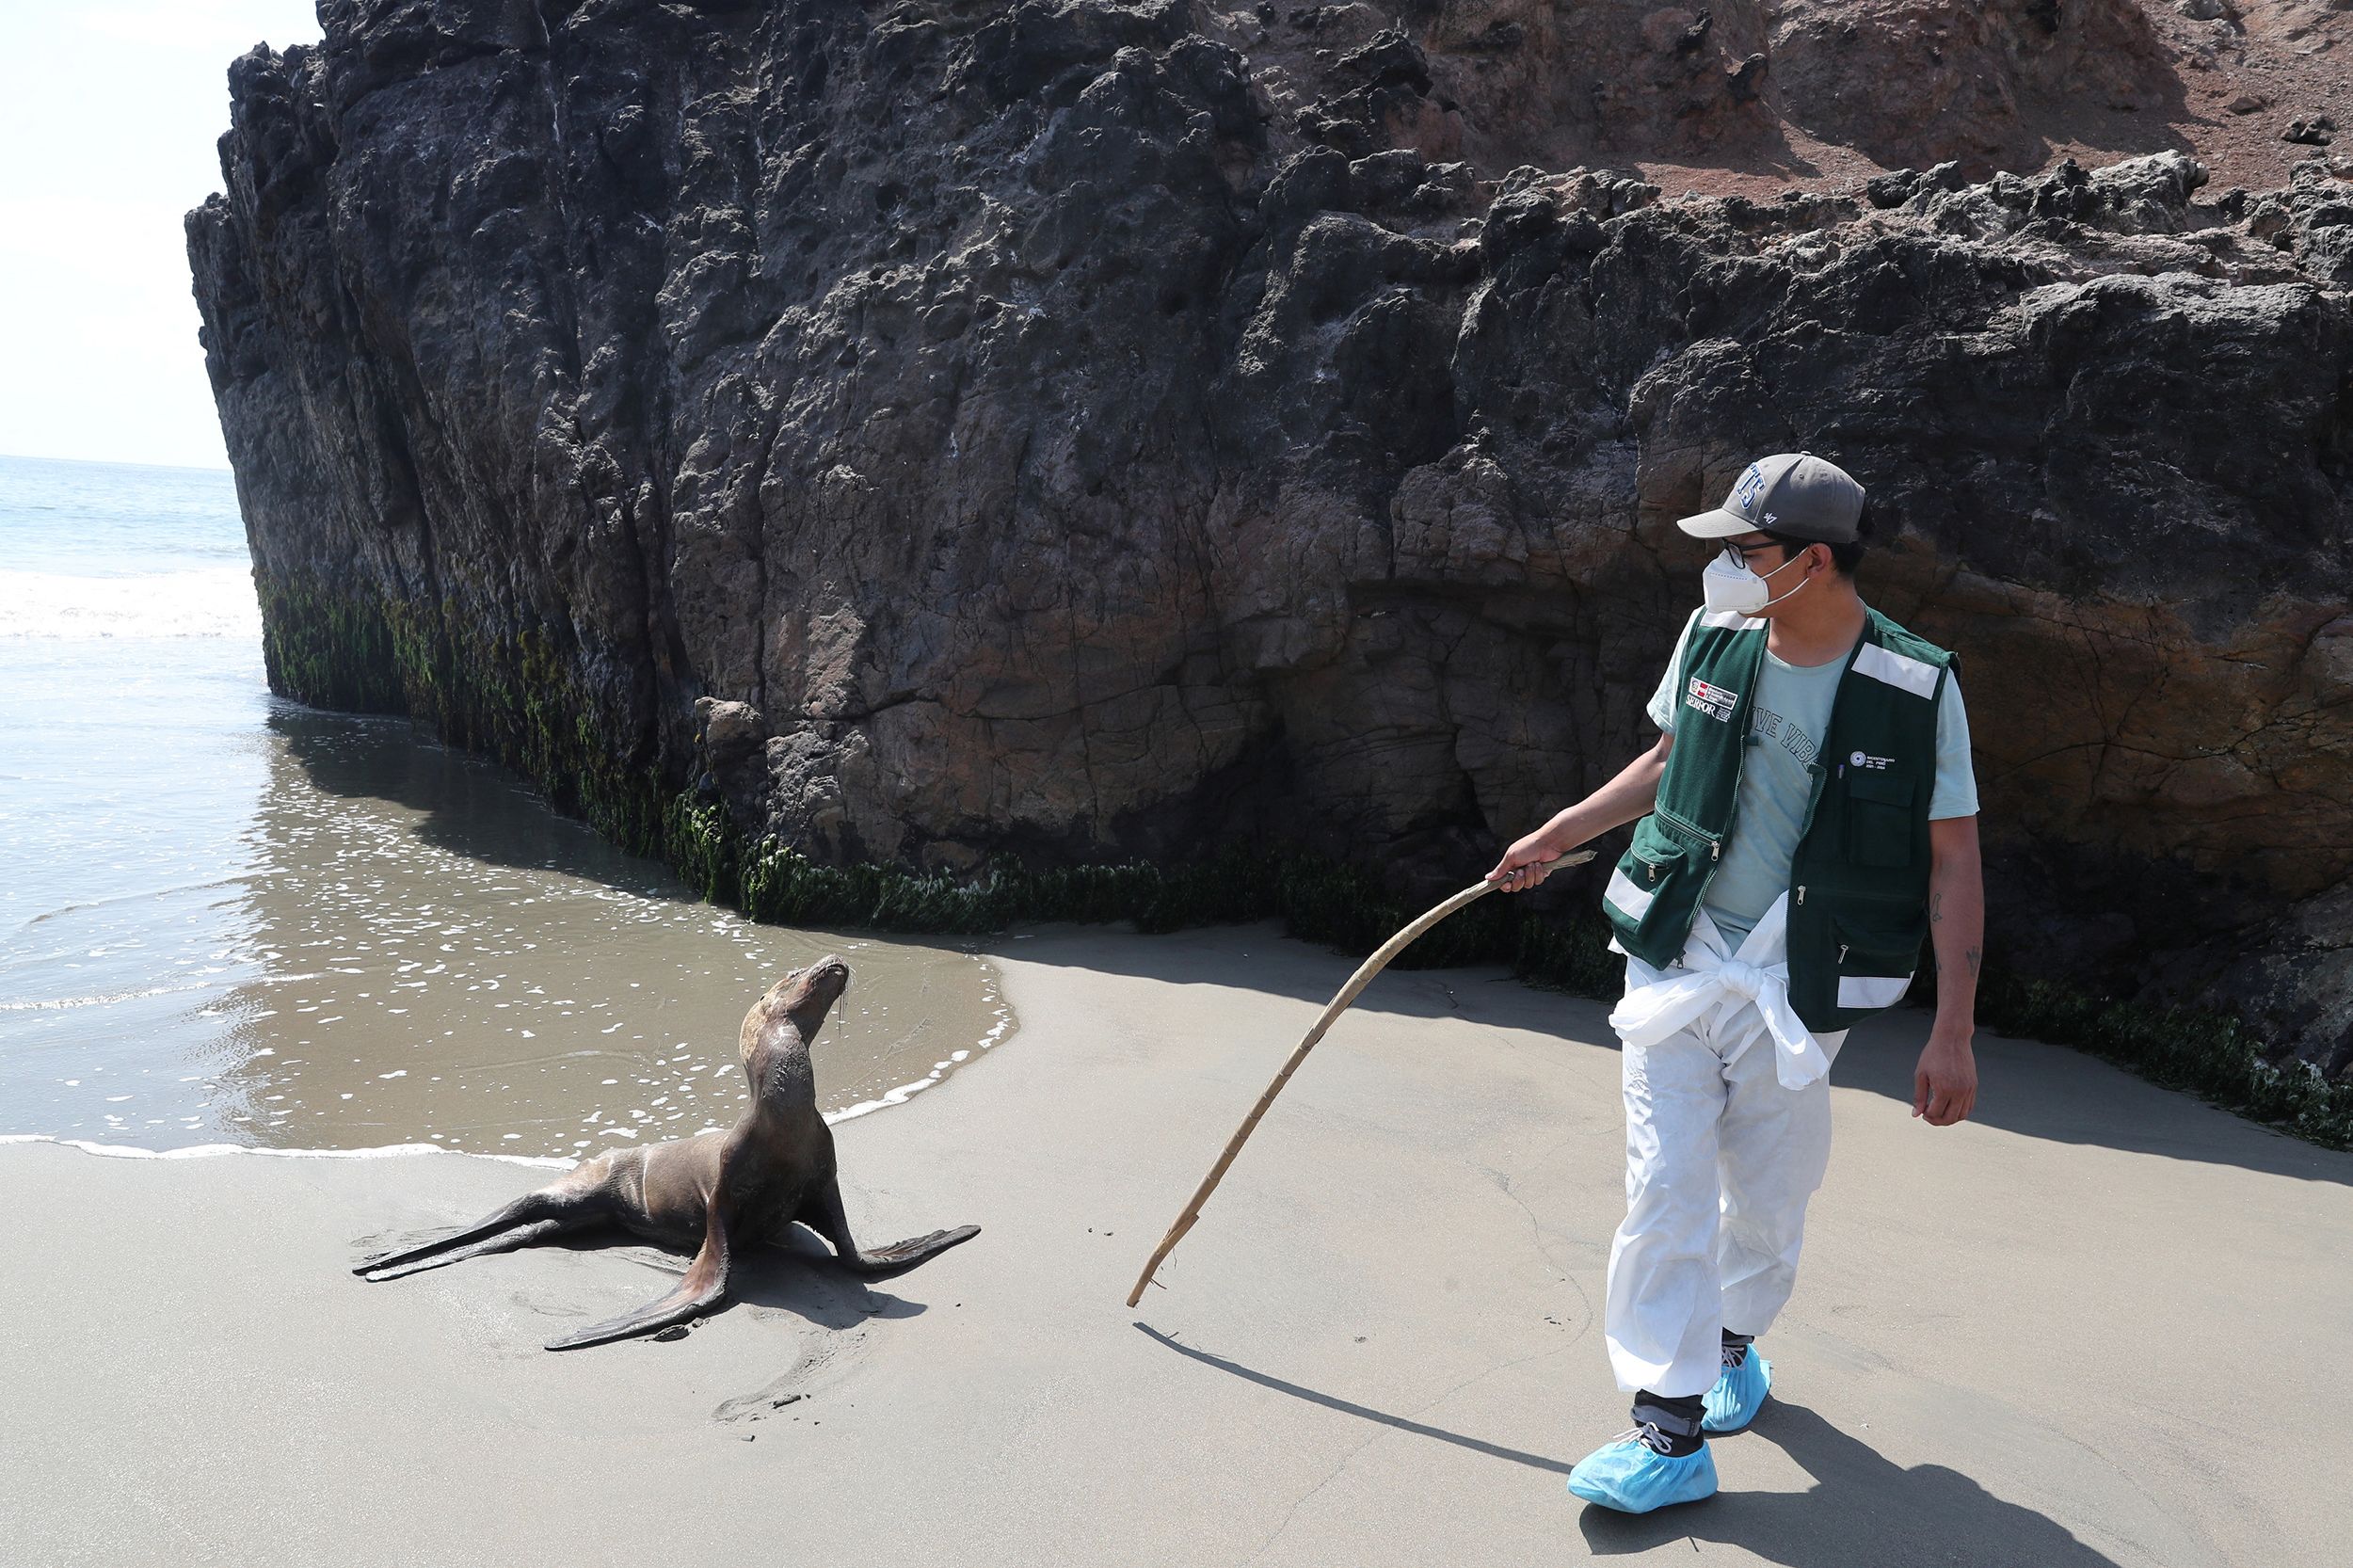 Thousands Of Sea Lion Deaths In Peru Due To Deadly Bird Flu Outbreak